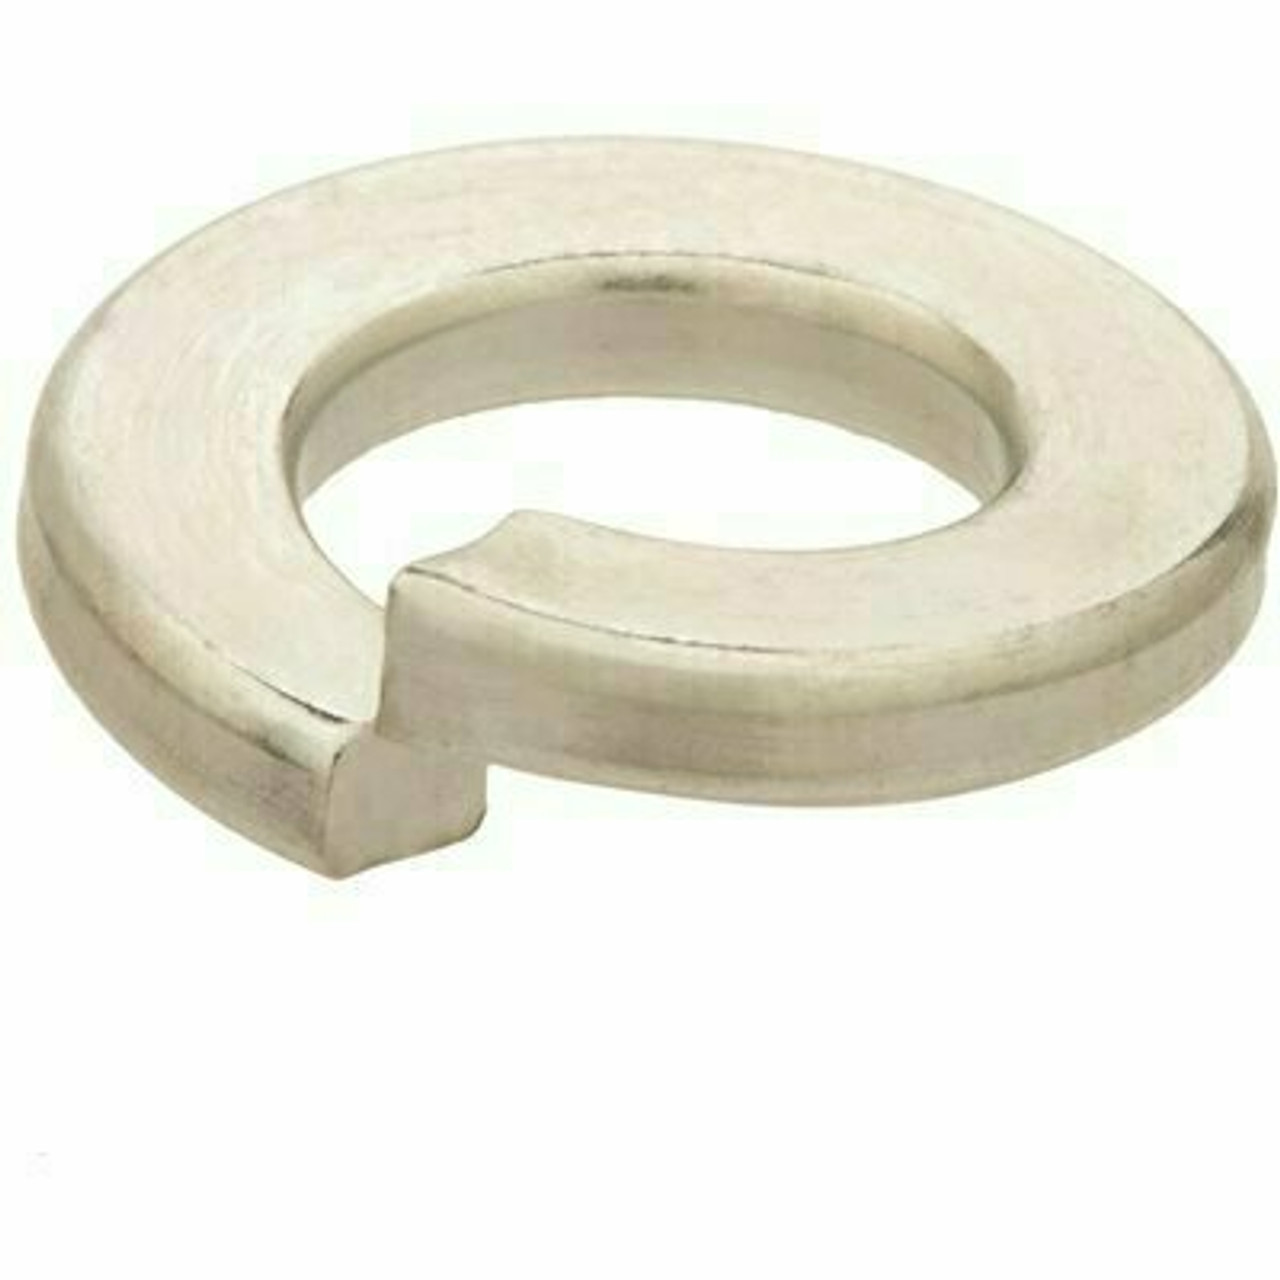 Everbilt 1/4 In. Zinc Plated Lock Washer (100-Pack)